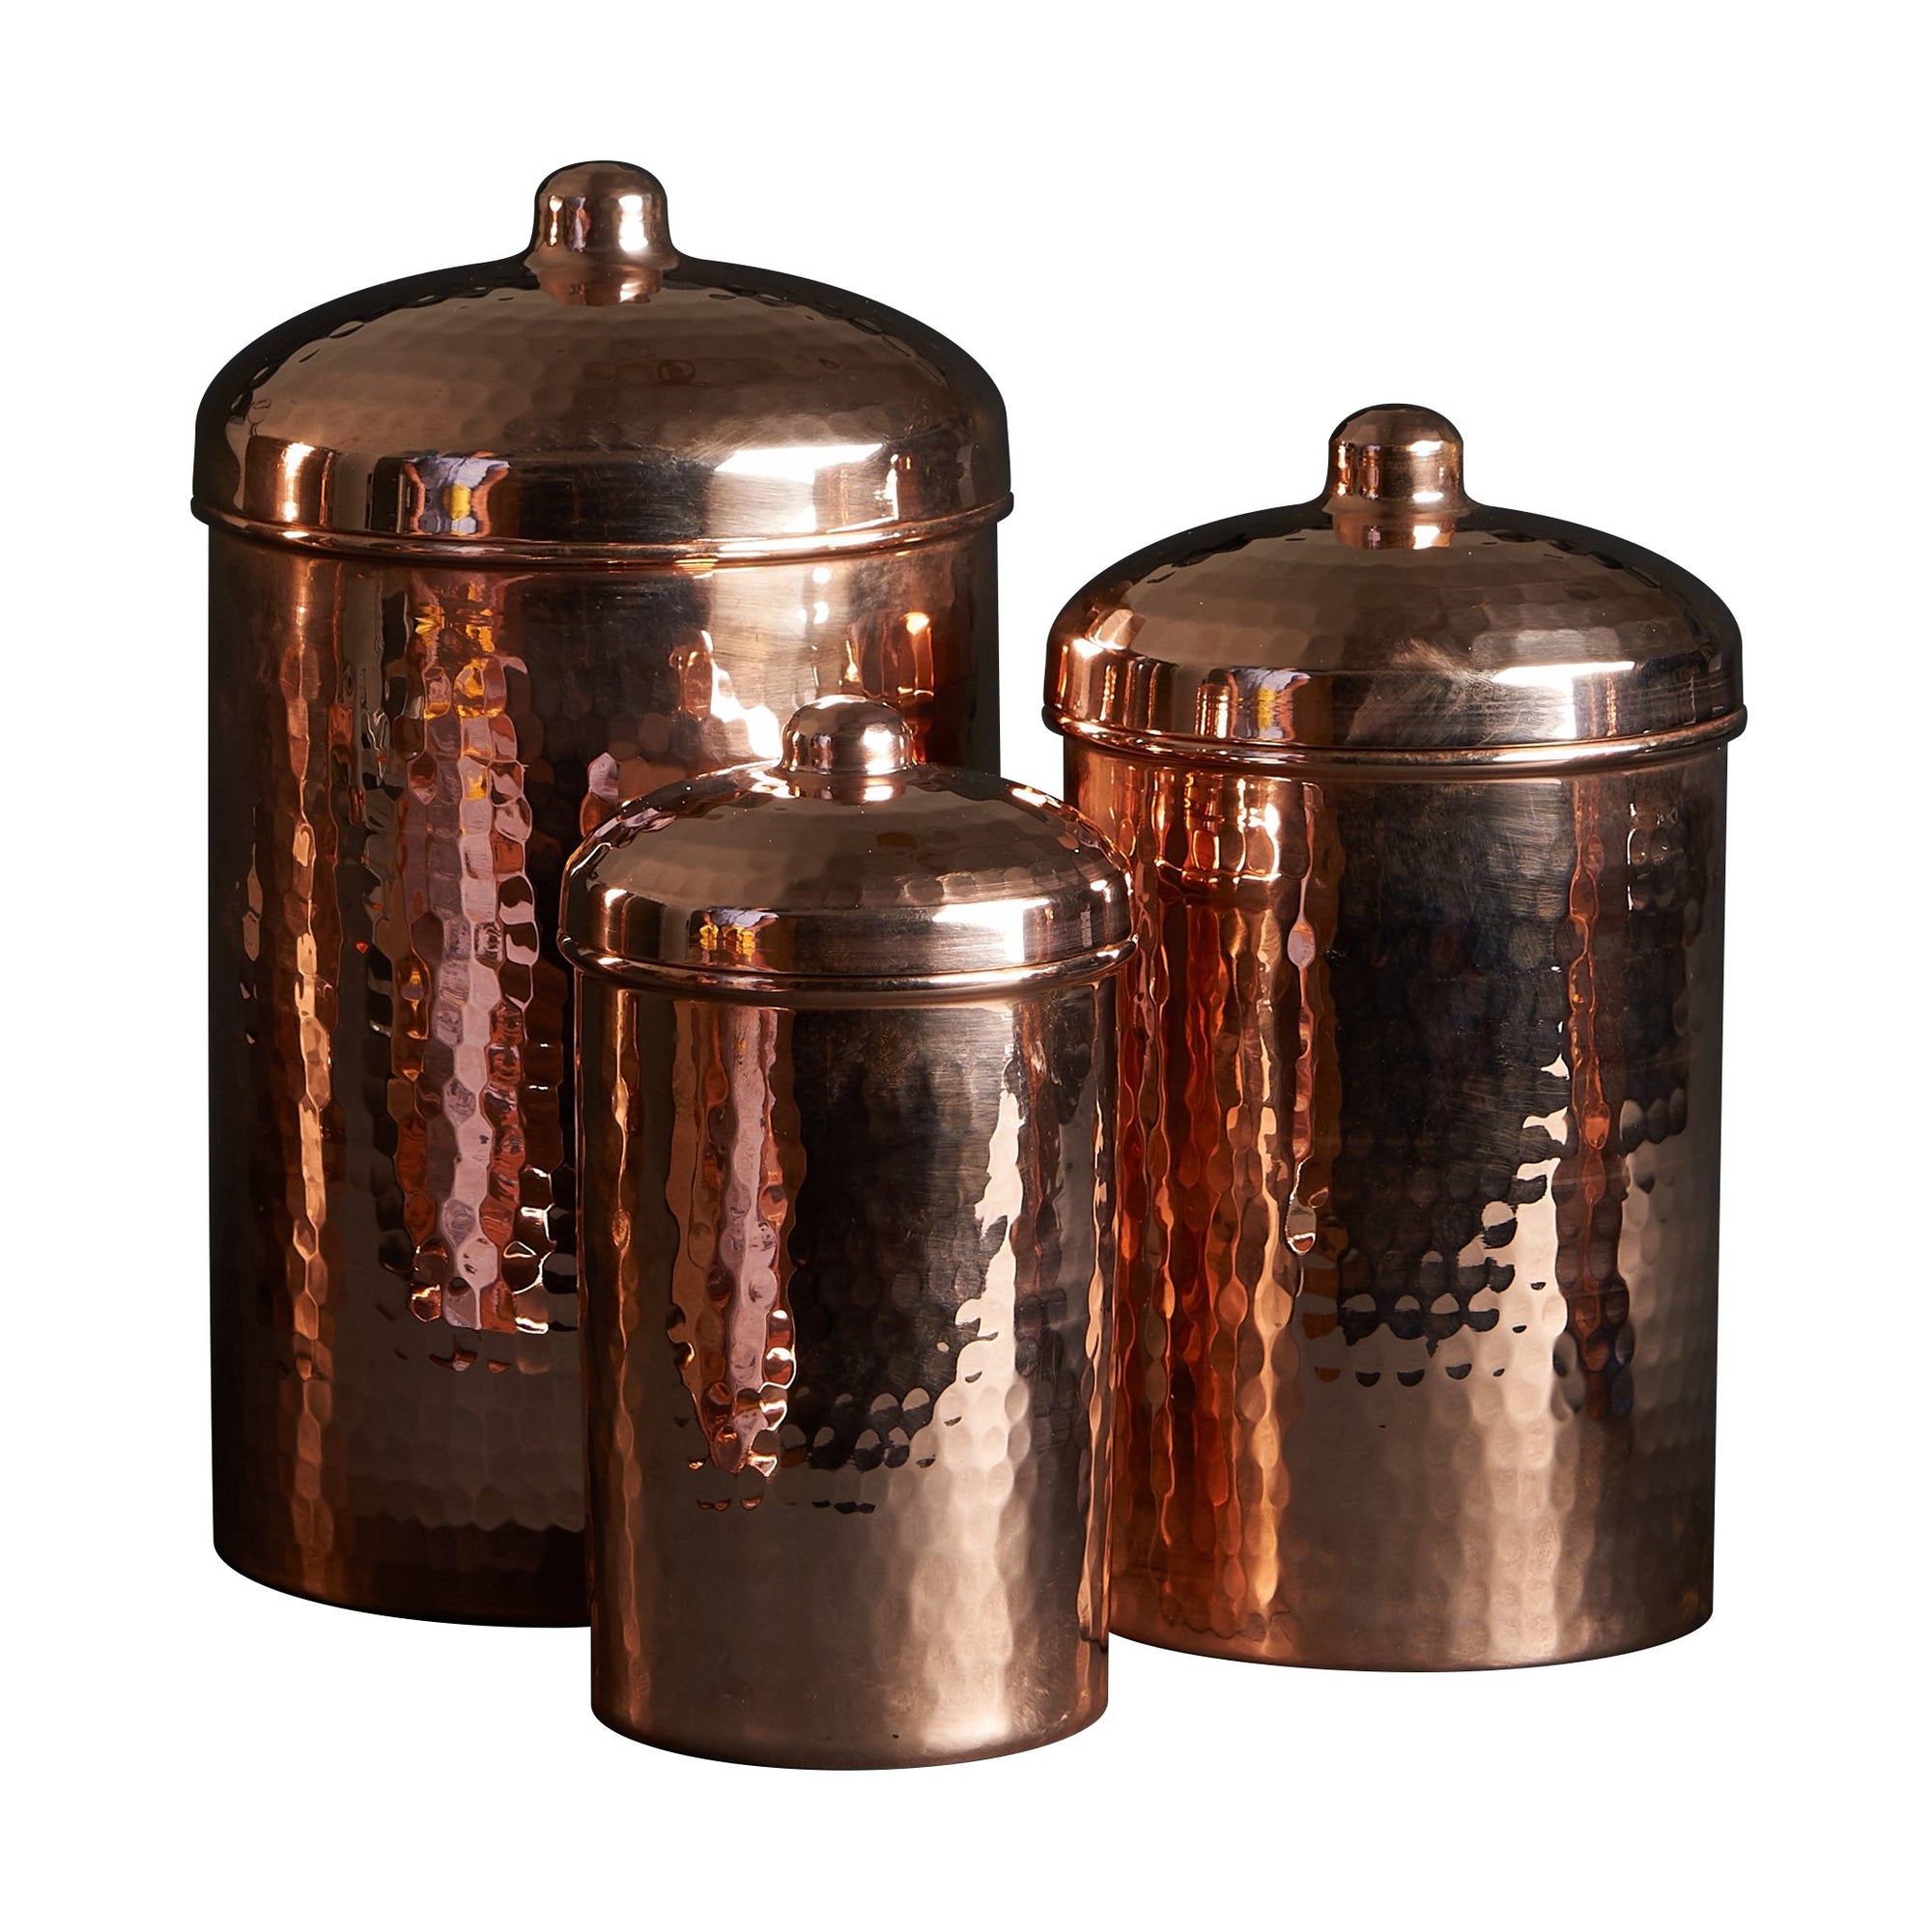 Copper Kitchen Canisters - Small Set, 3 Pieces